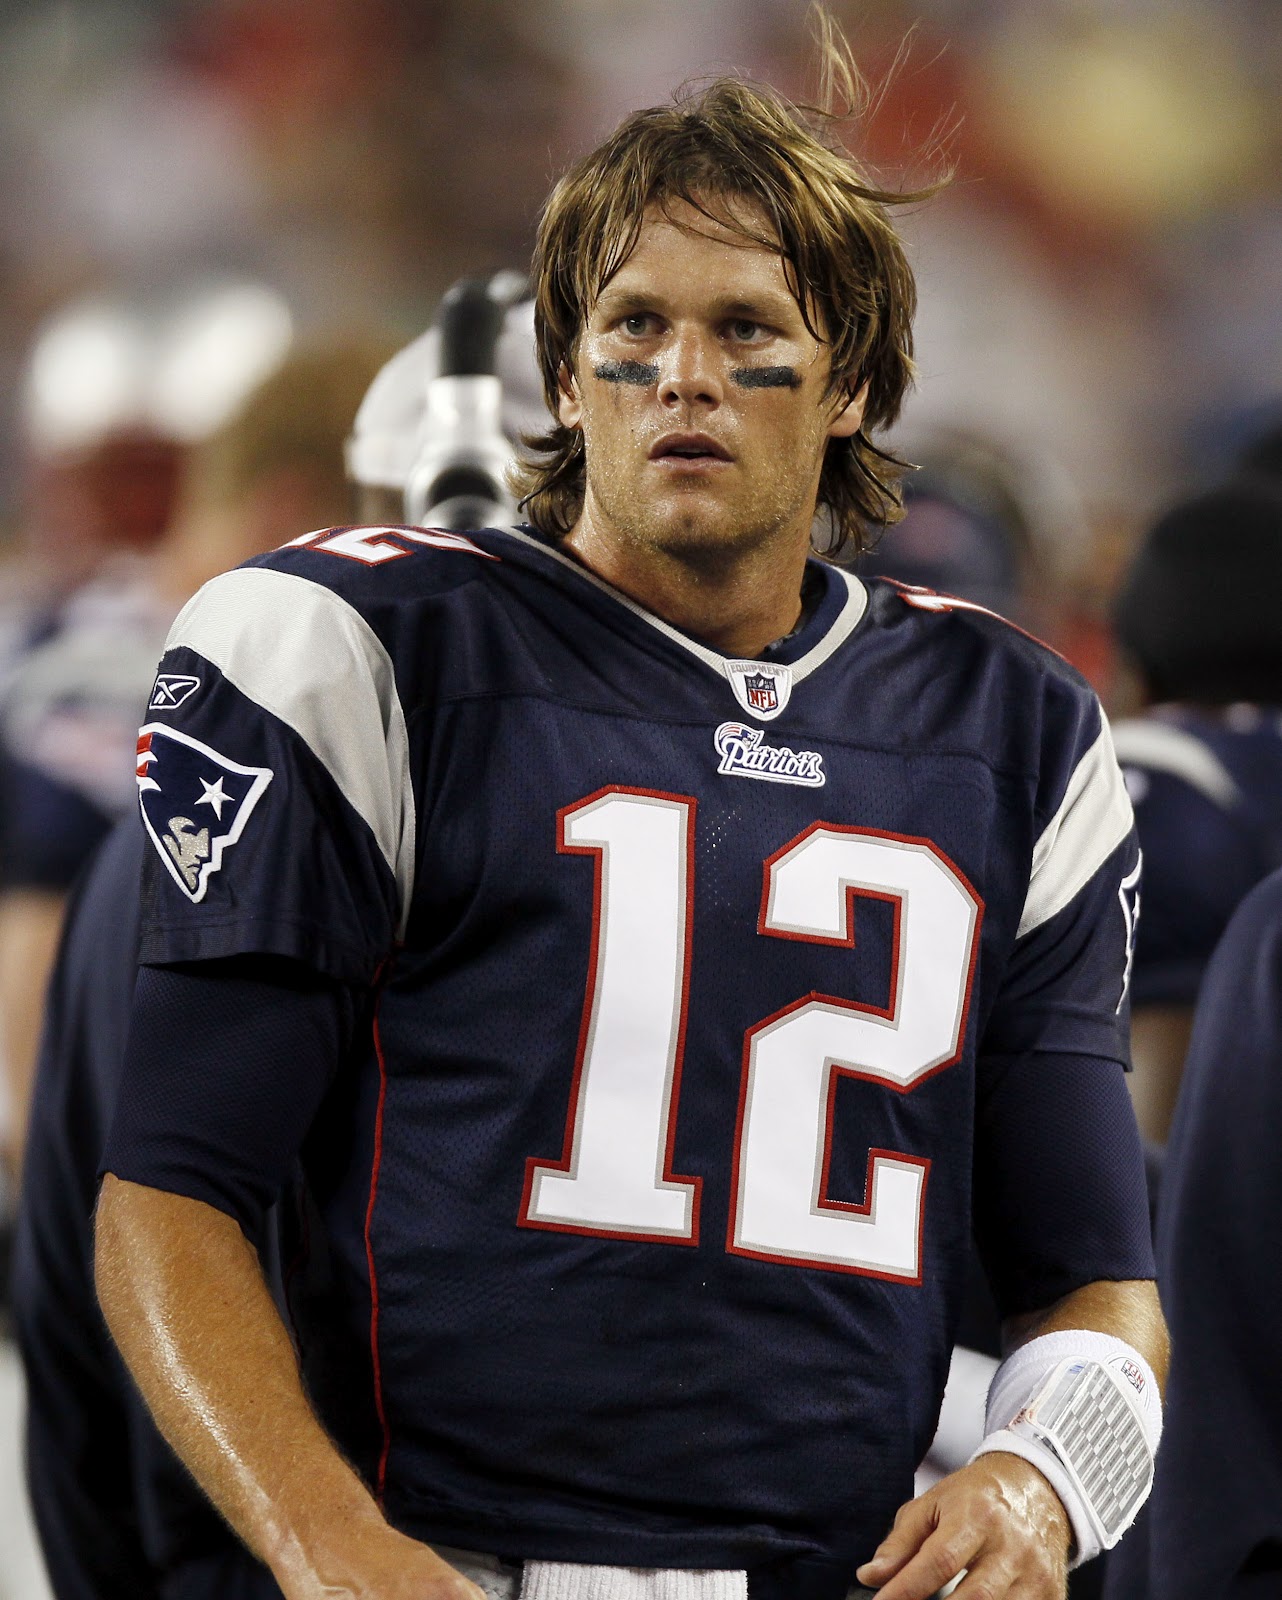 Tom Brady Profile And Image-Pictures | All Sports Players